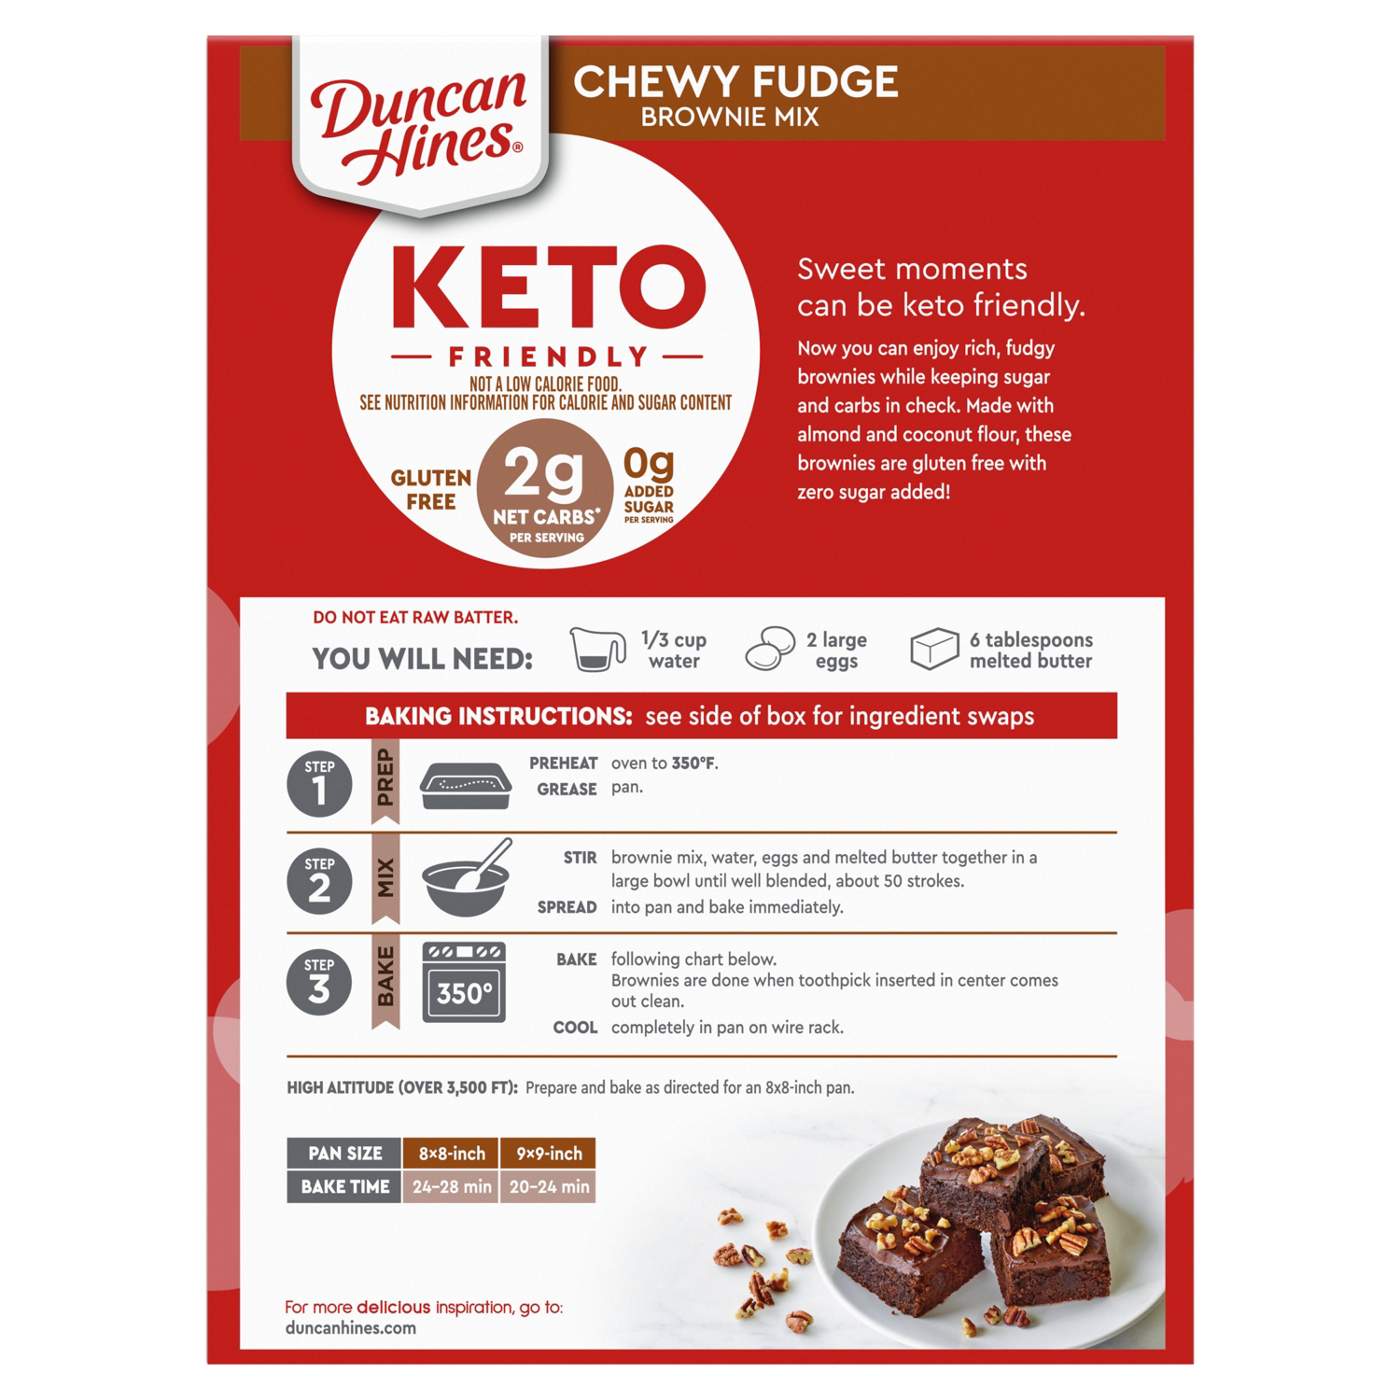 Duncan Hines Keto Friendly Gluten Free No Sugar Added Chewy Fudge Brownie Mix; image 3 of 7